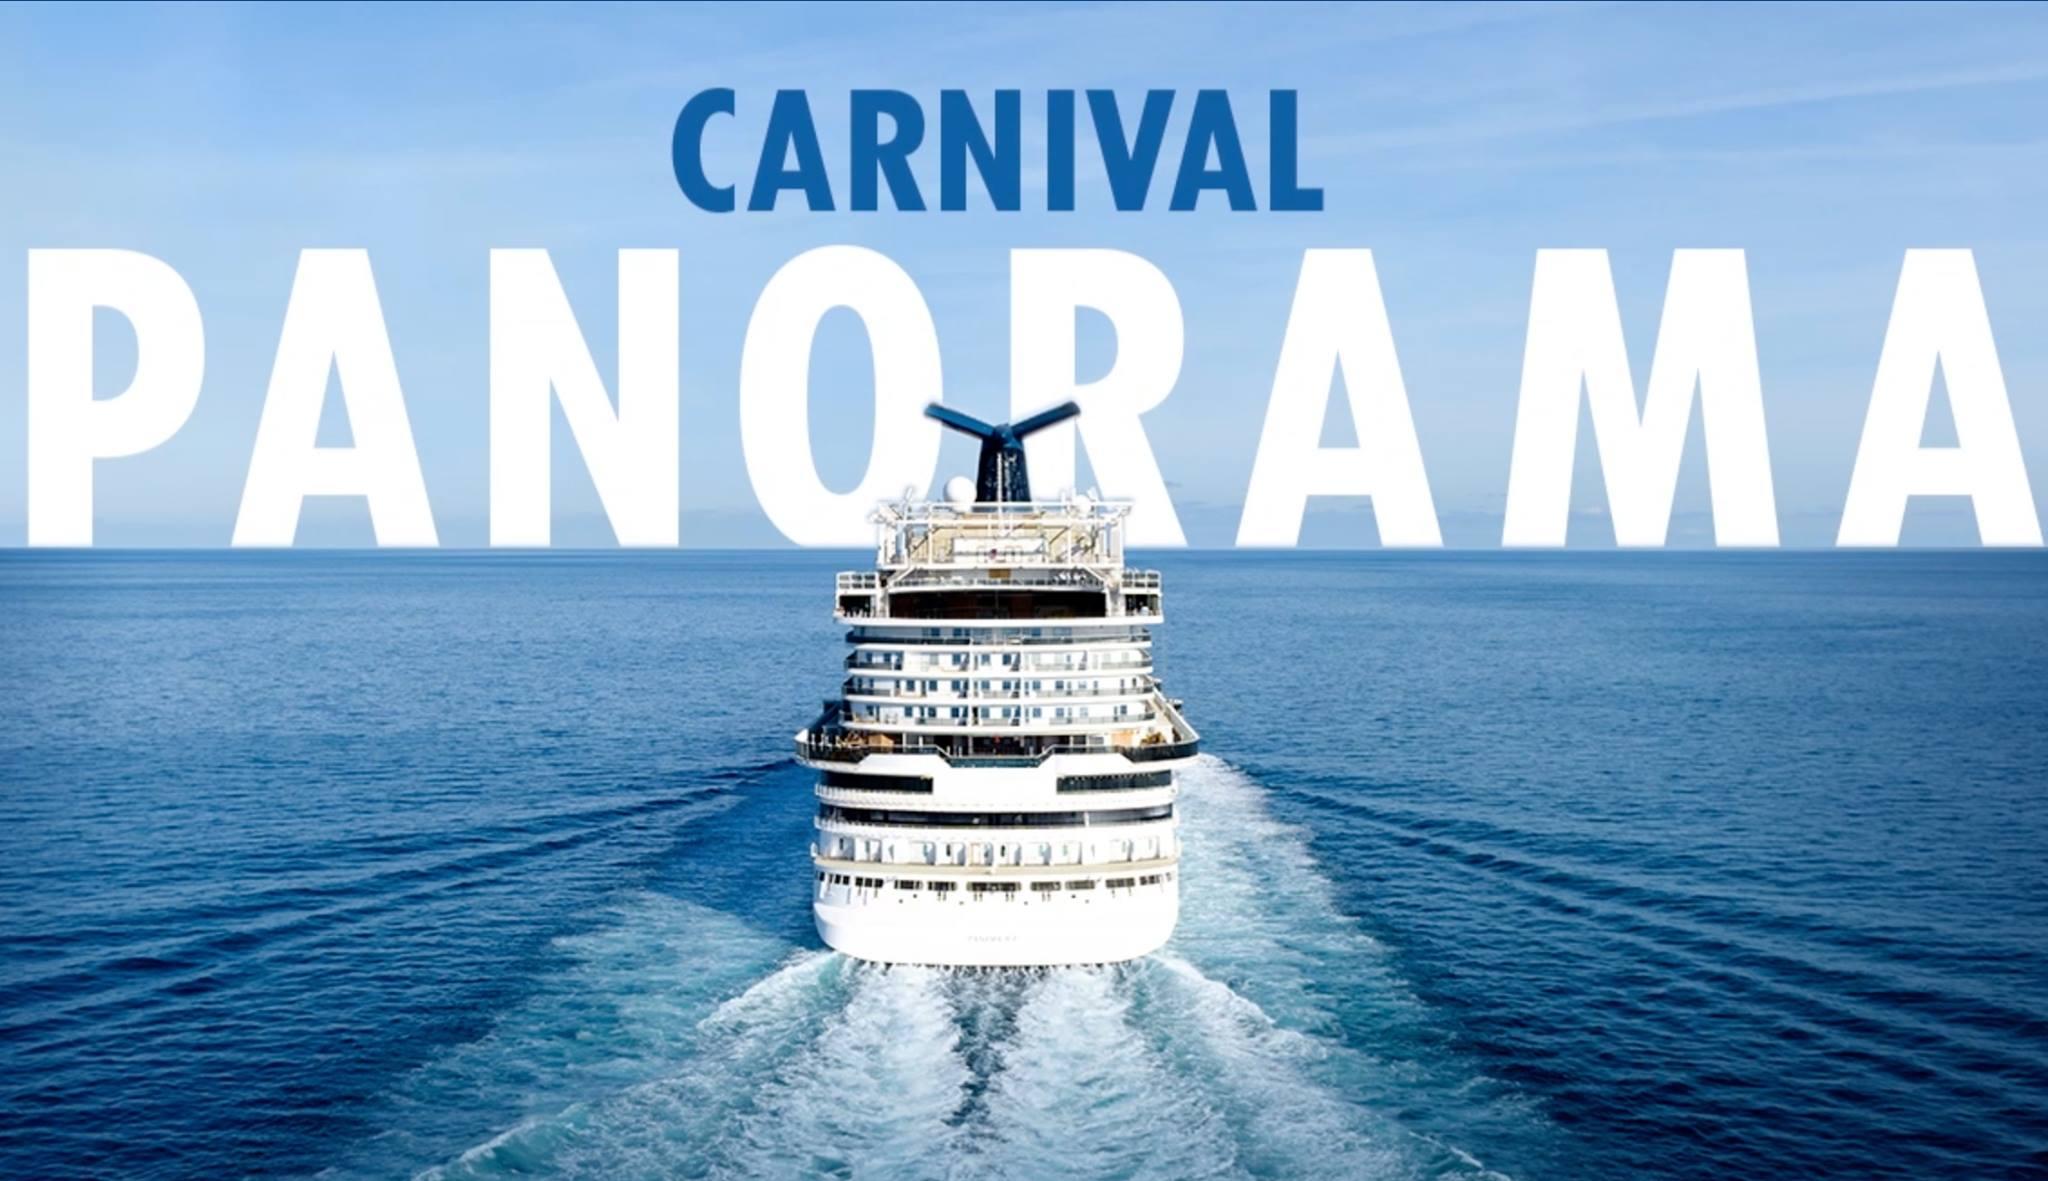 Sail on the New Carnival Panorama with us!